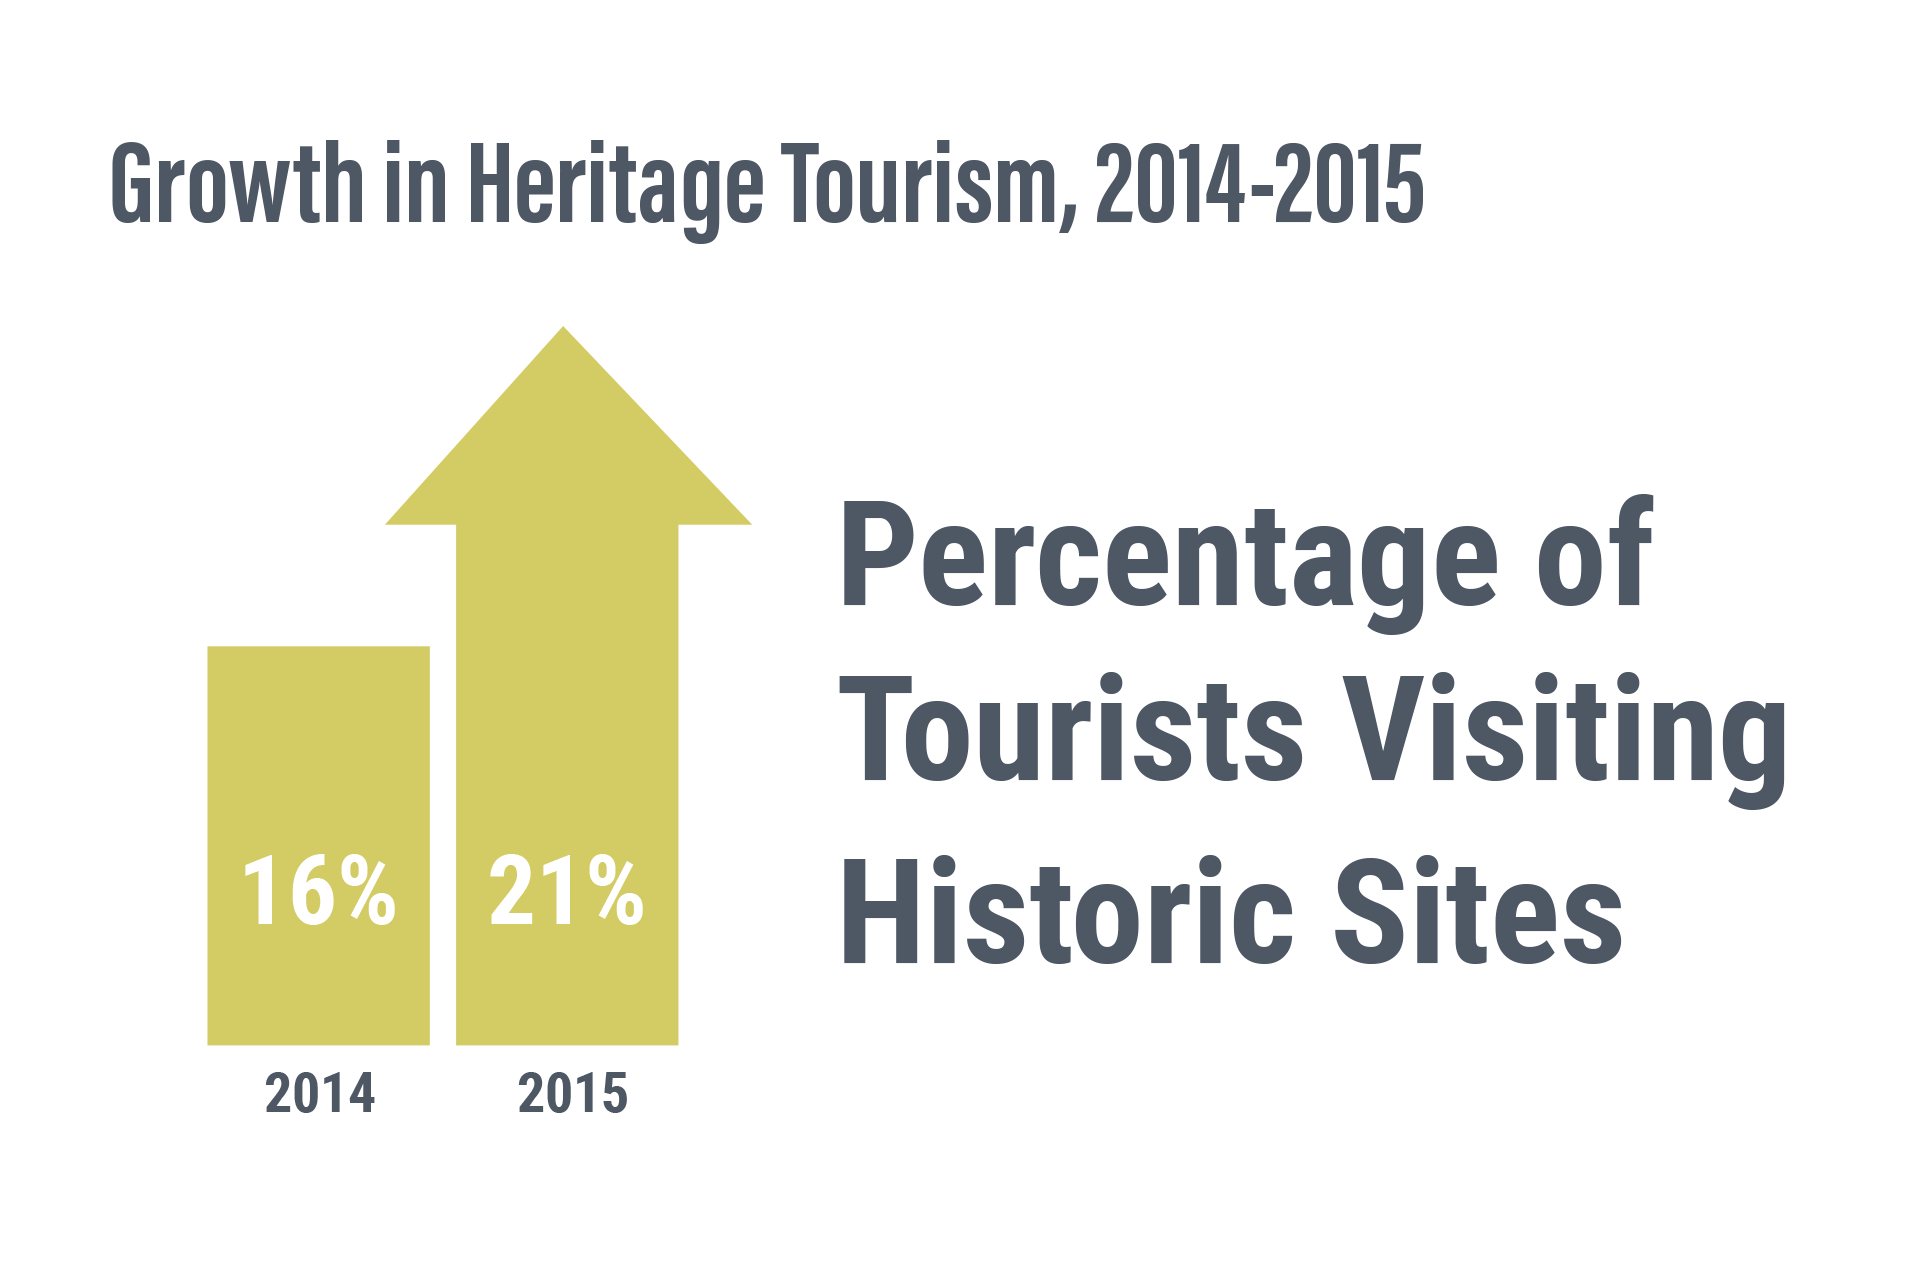 Growth in Heritage Tourism, 2014-2015